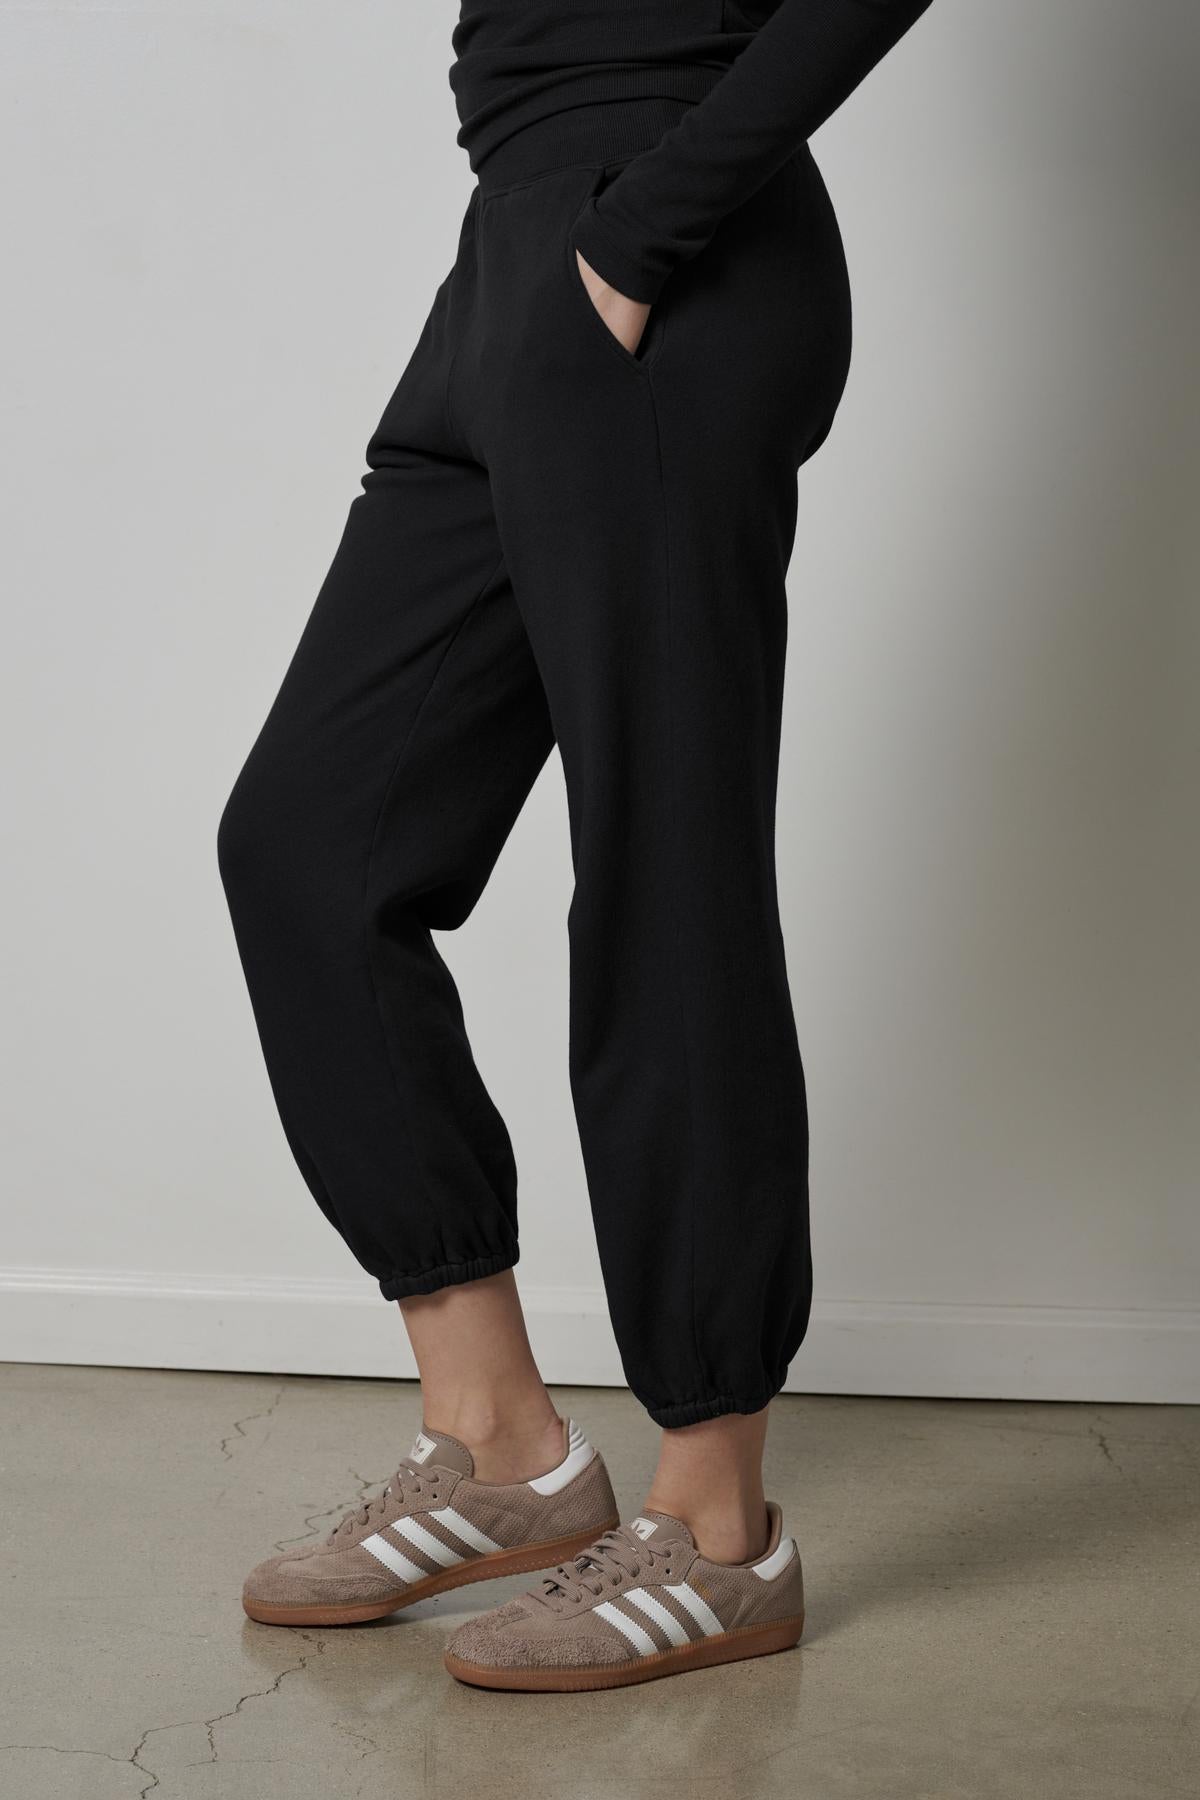 A woman wearing Velvet by Jenny Graham ZUMA sweat pants and sneakers.-35190174253249